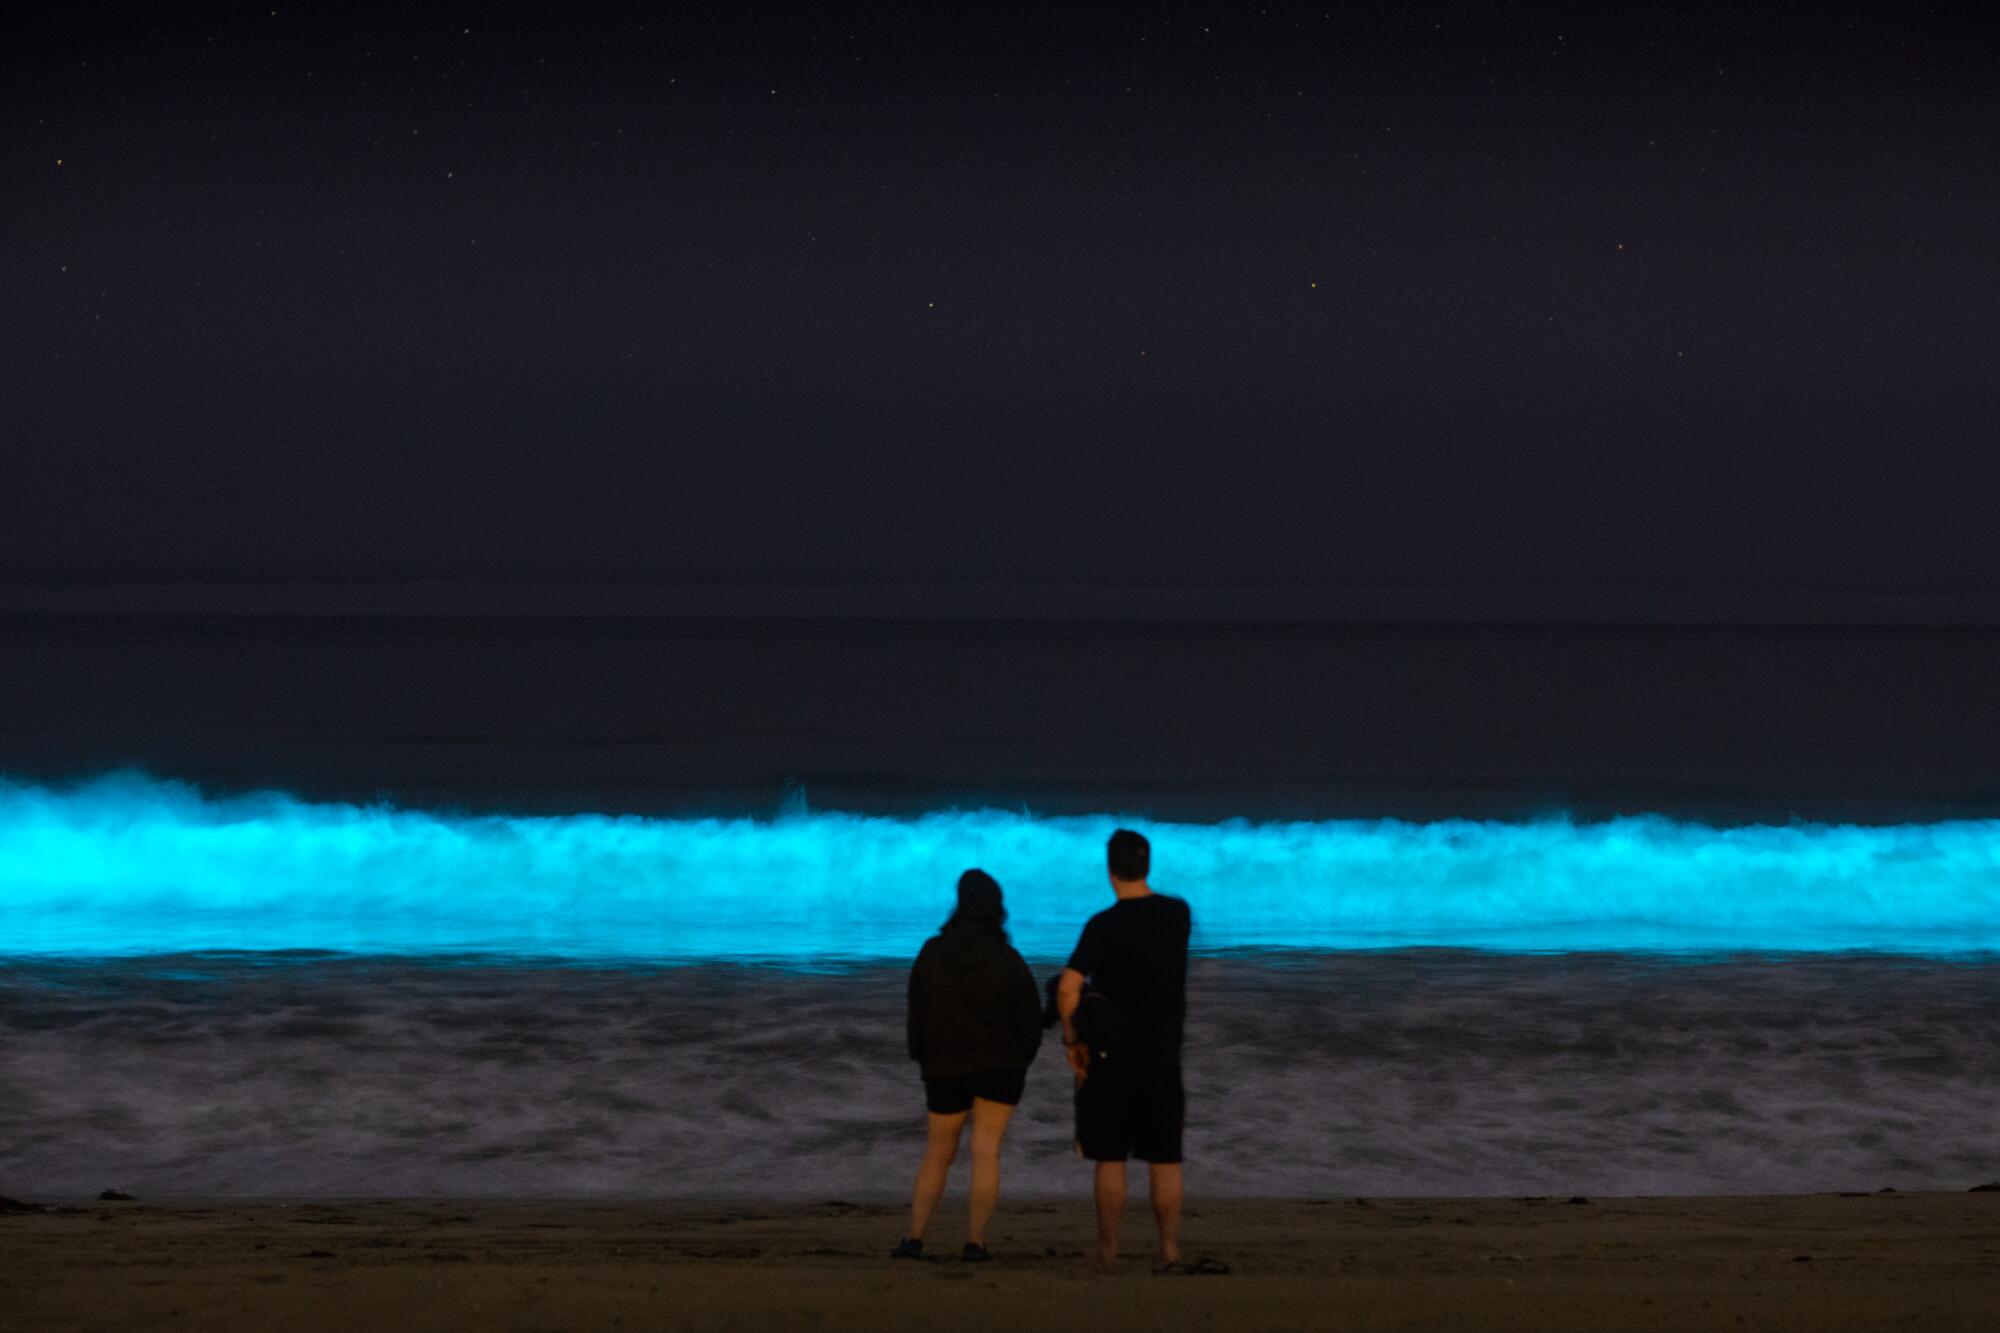 Video, photos show glowing blue waves in the South Bay - Los Angeles Times